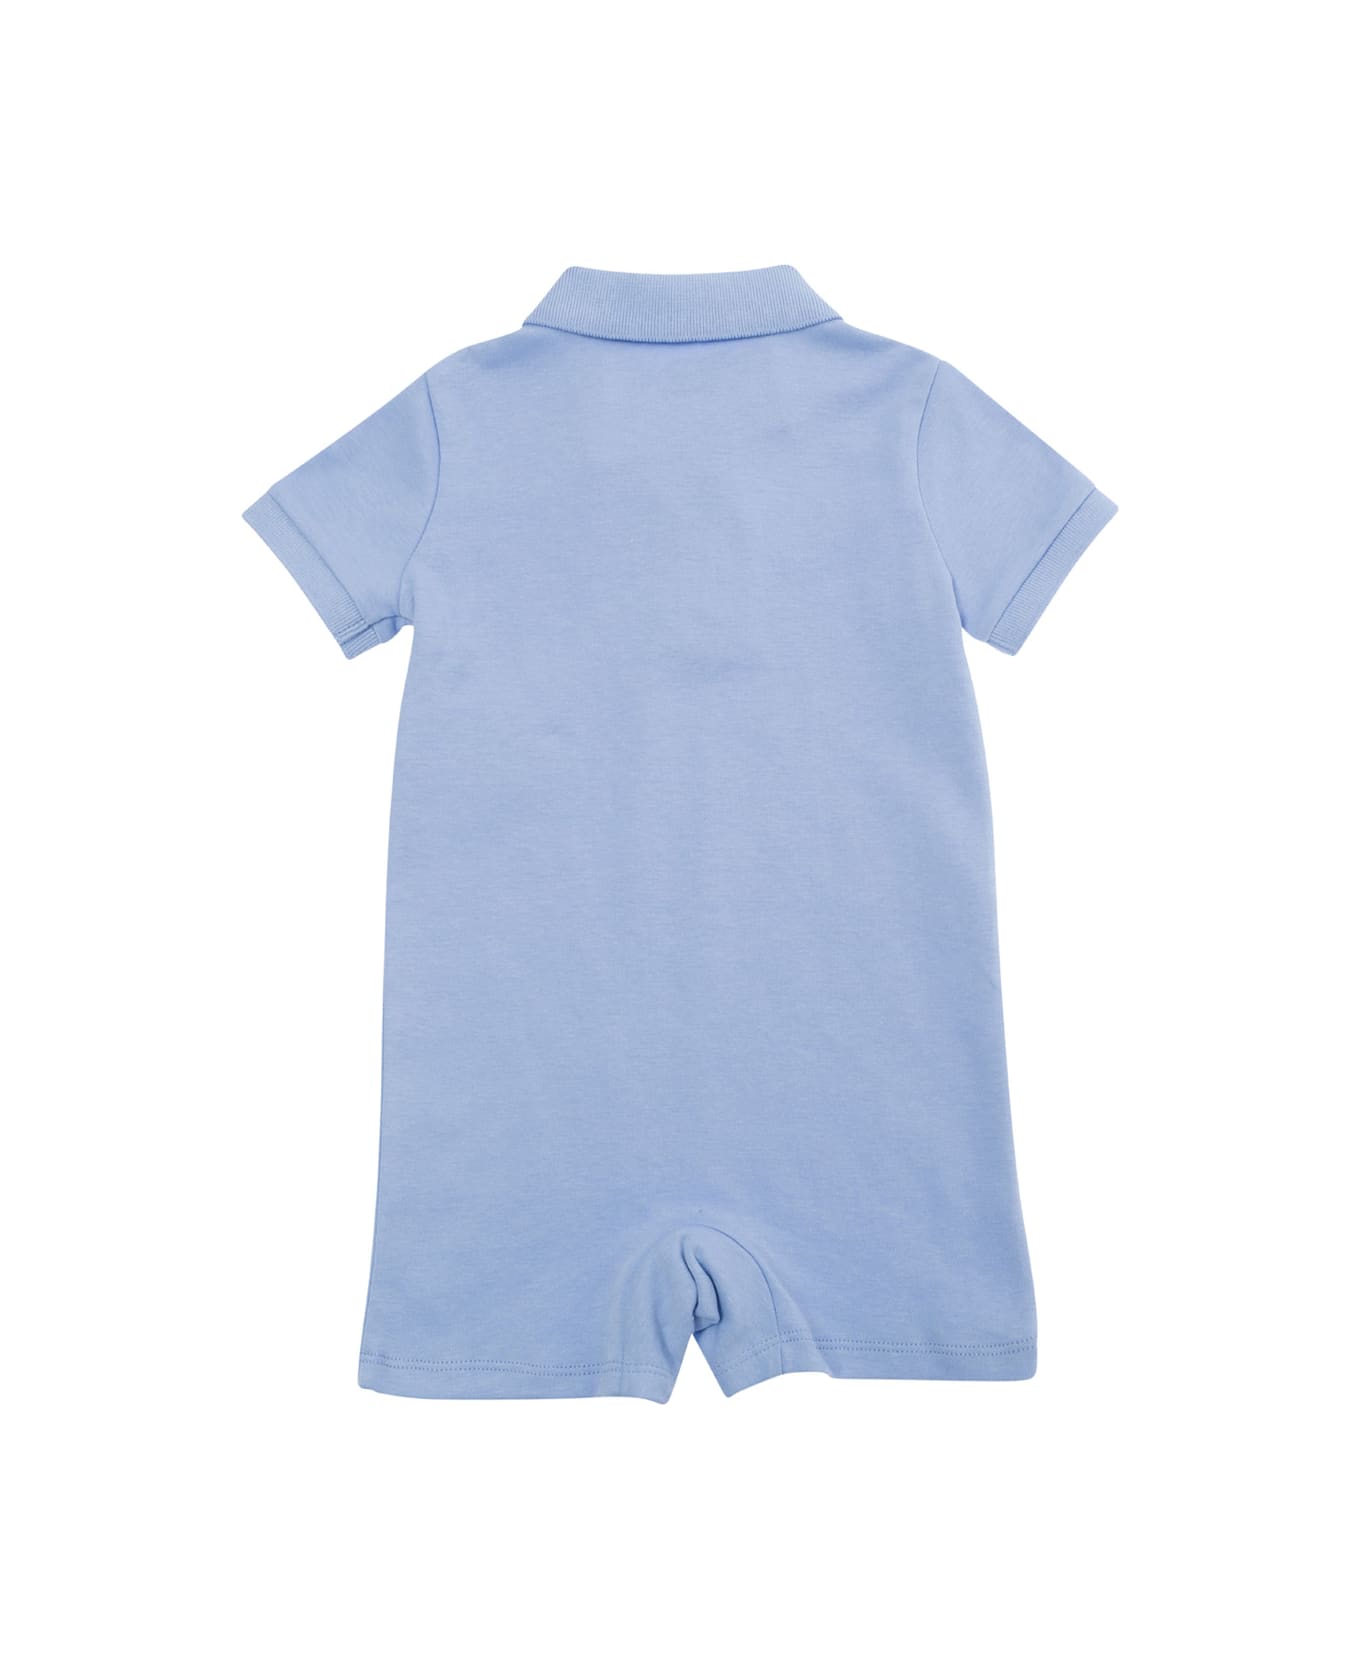 Polo Ralph Lauren Light Blue Dress With Pony Embroidery In Cotton Baby - Light blue